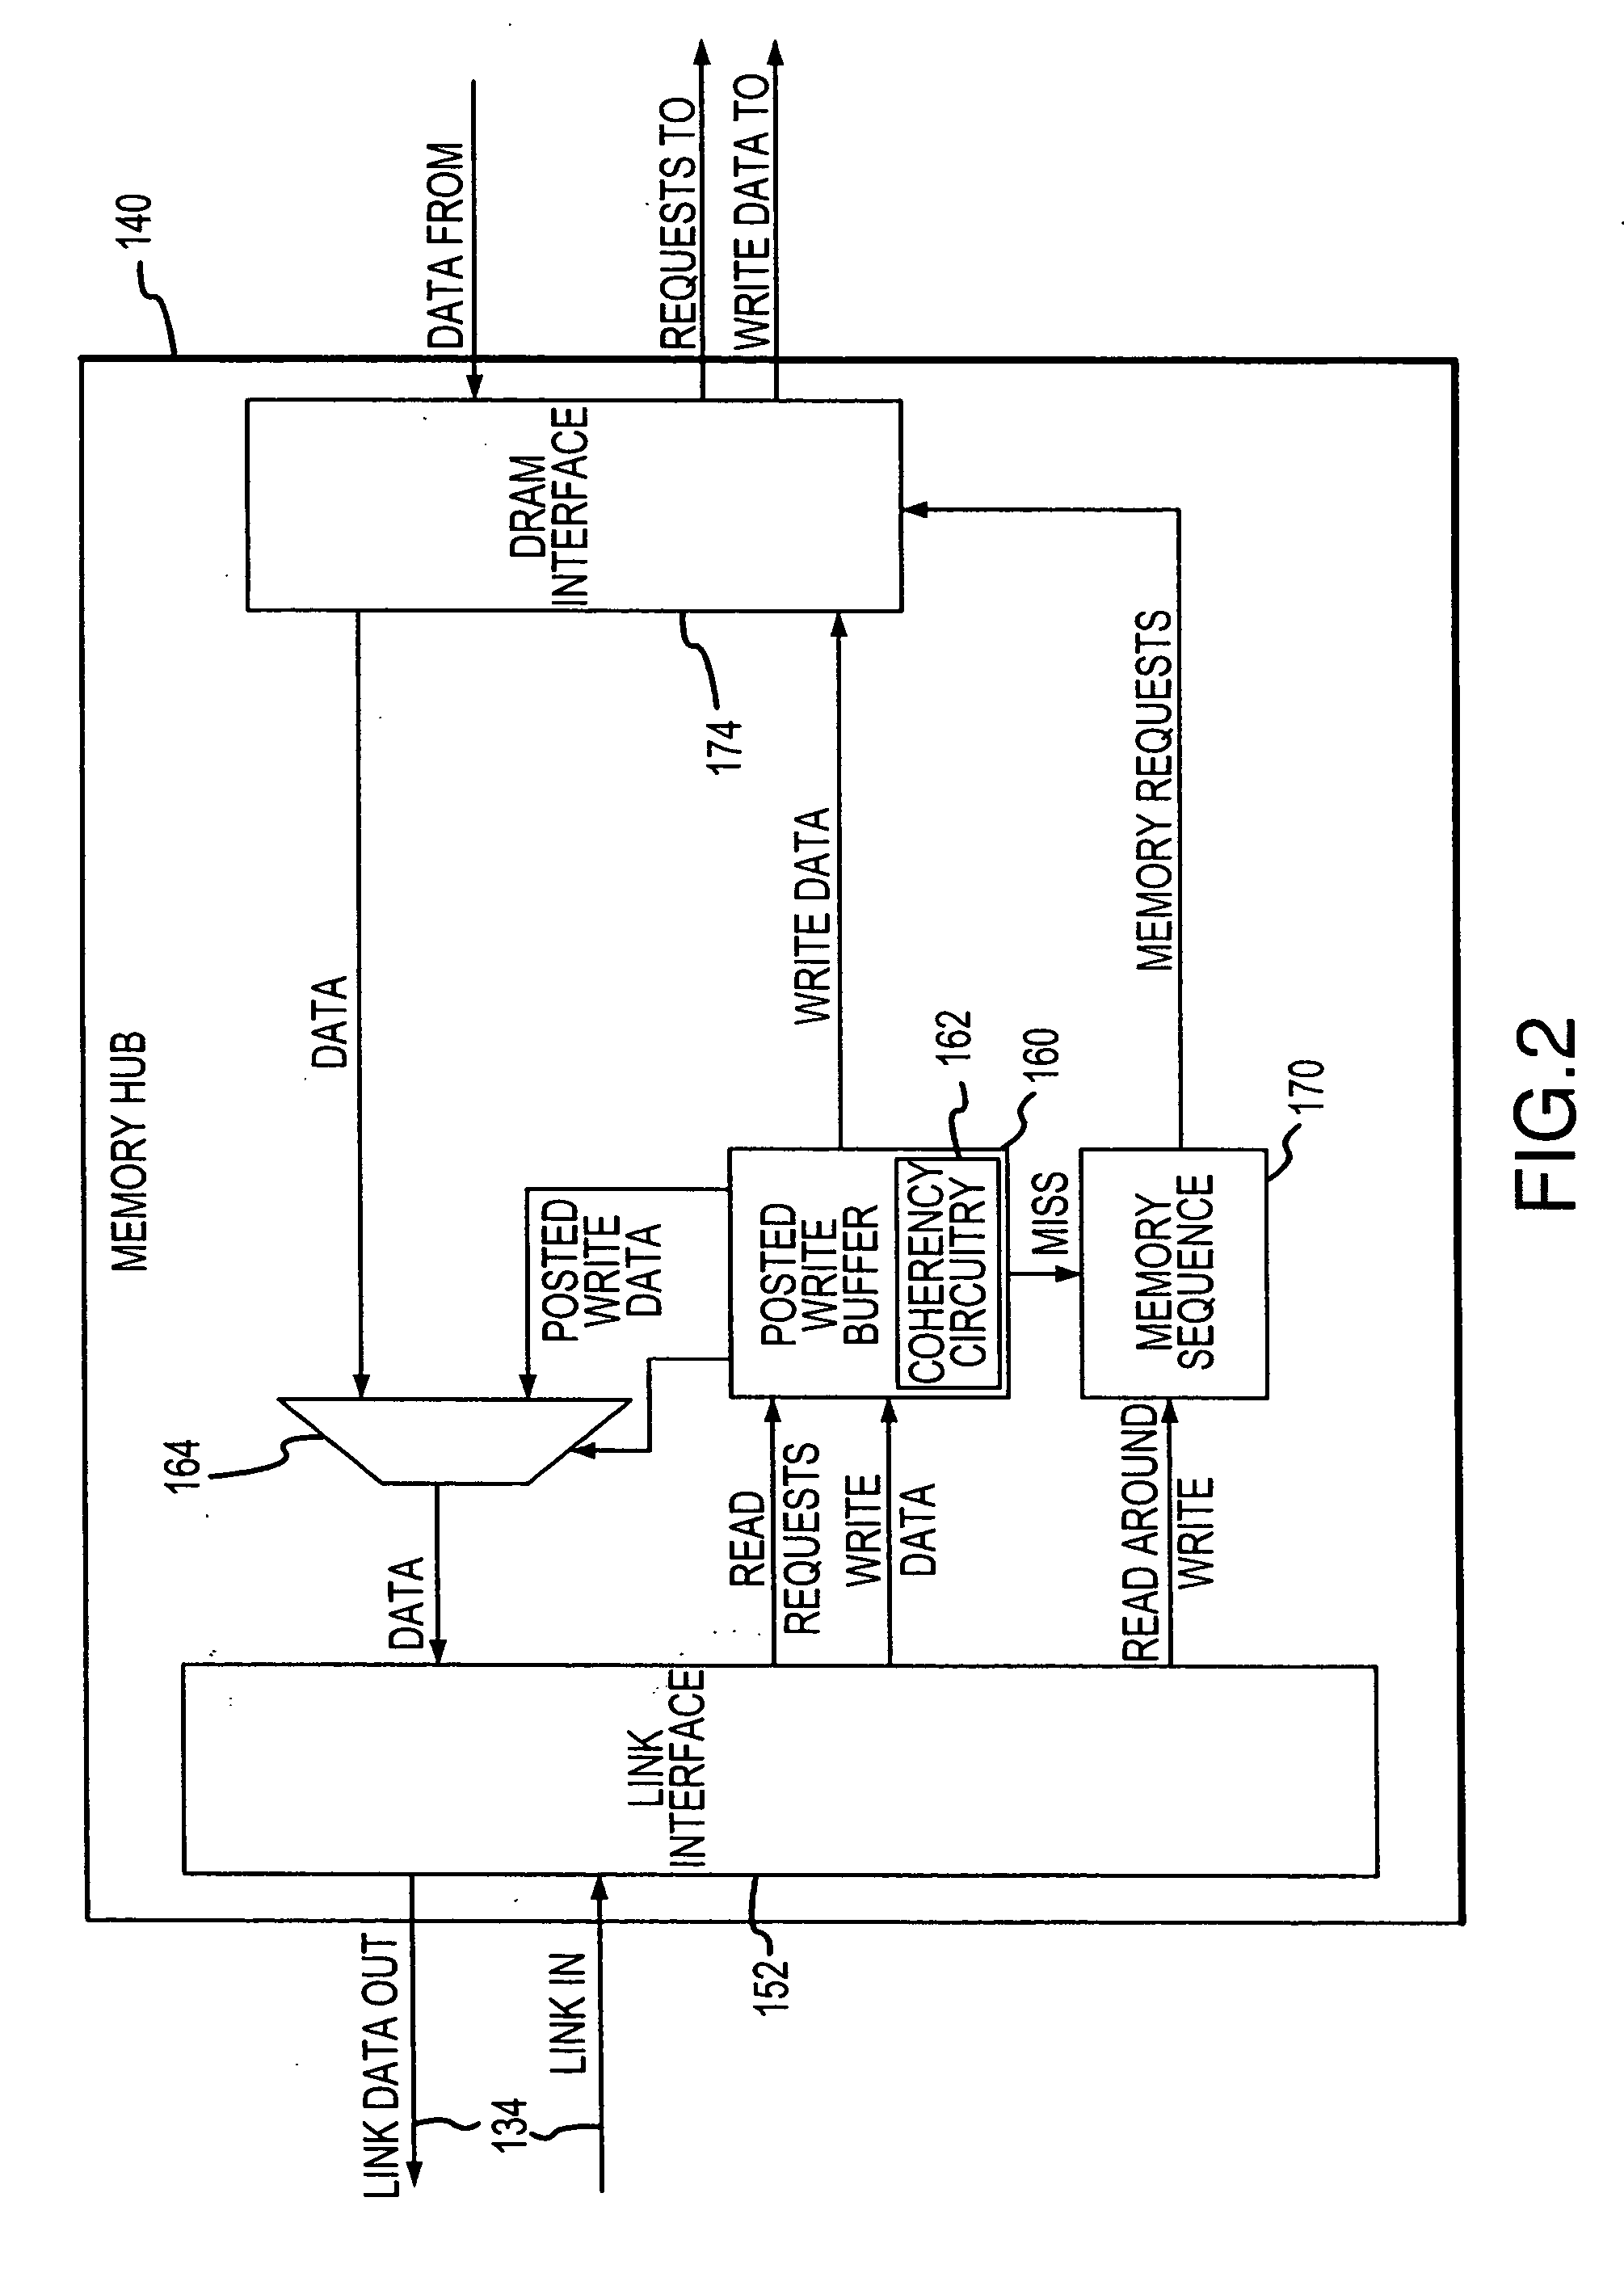 Posted write buffers and method of posting write requests in memory modules